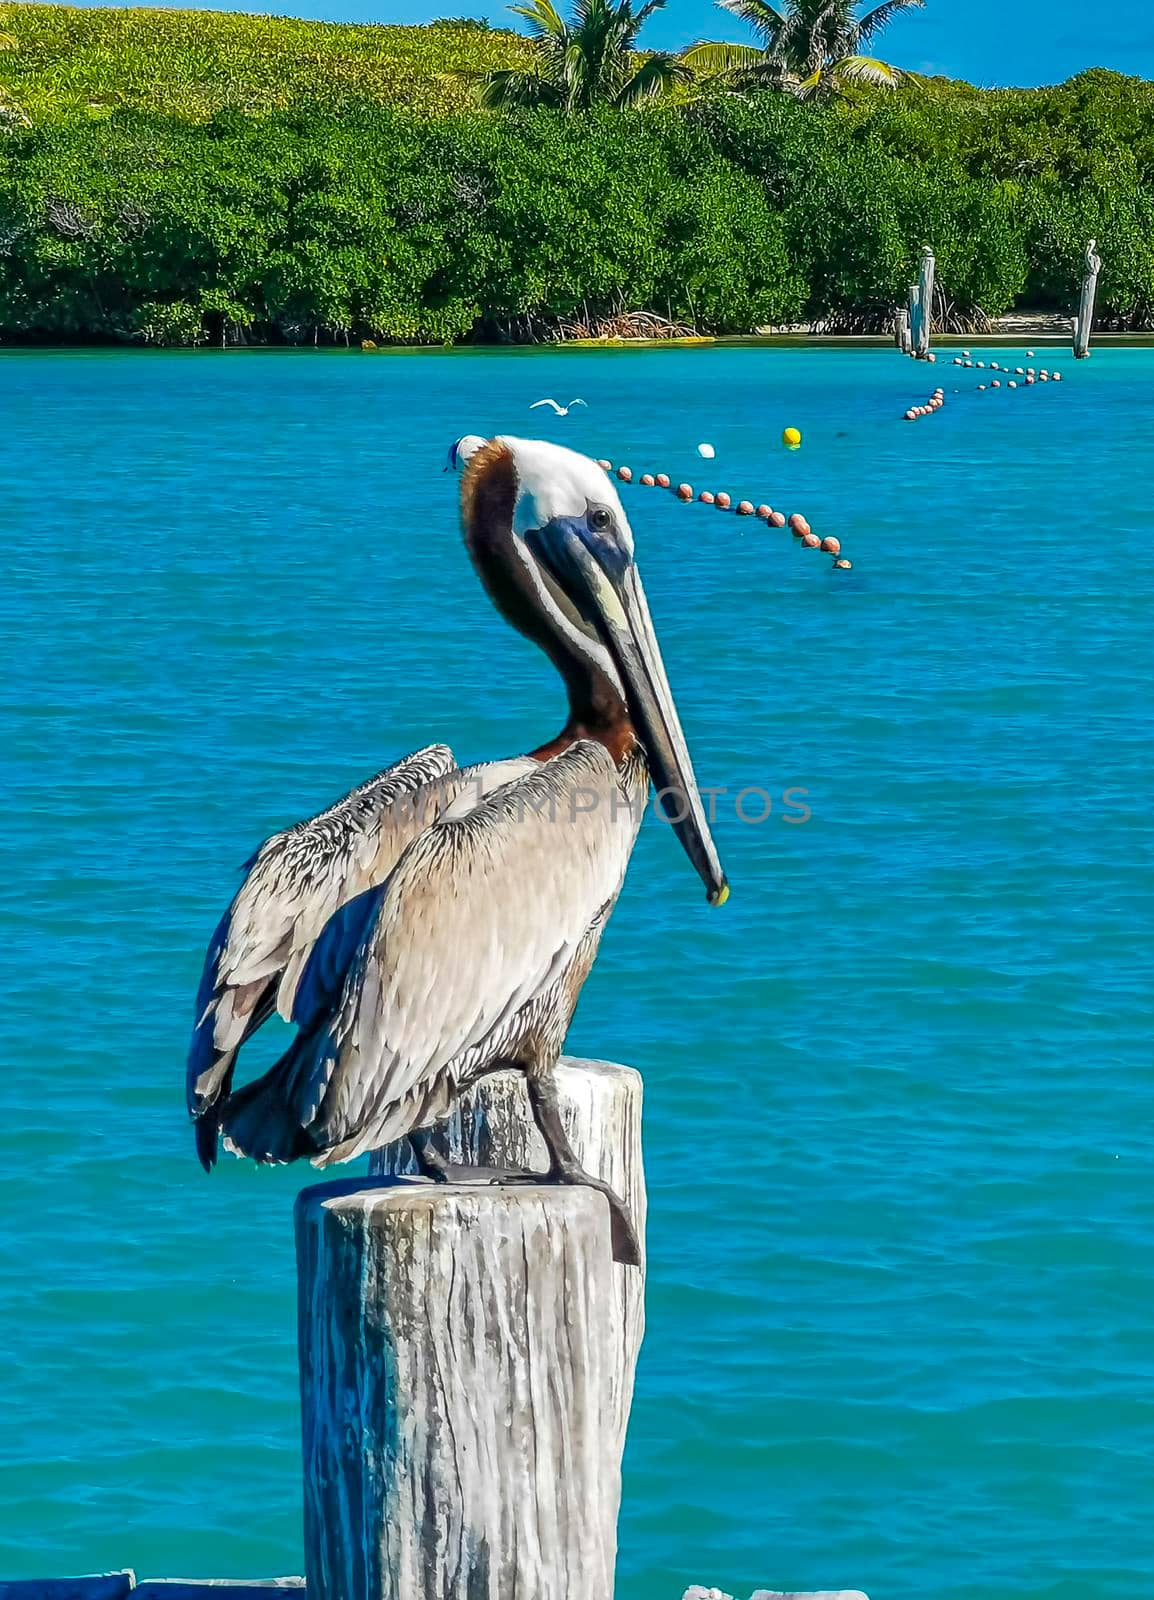 Pelicans pelican bird birds on port of the Isla Contoy island harbor with turquoise blue water in Quintana Roo Mexico.